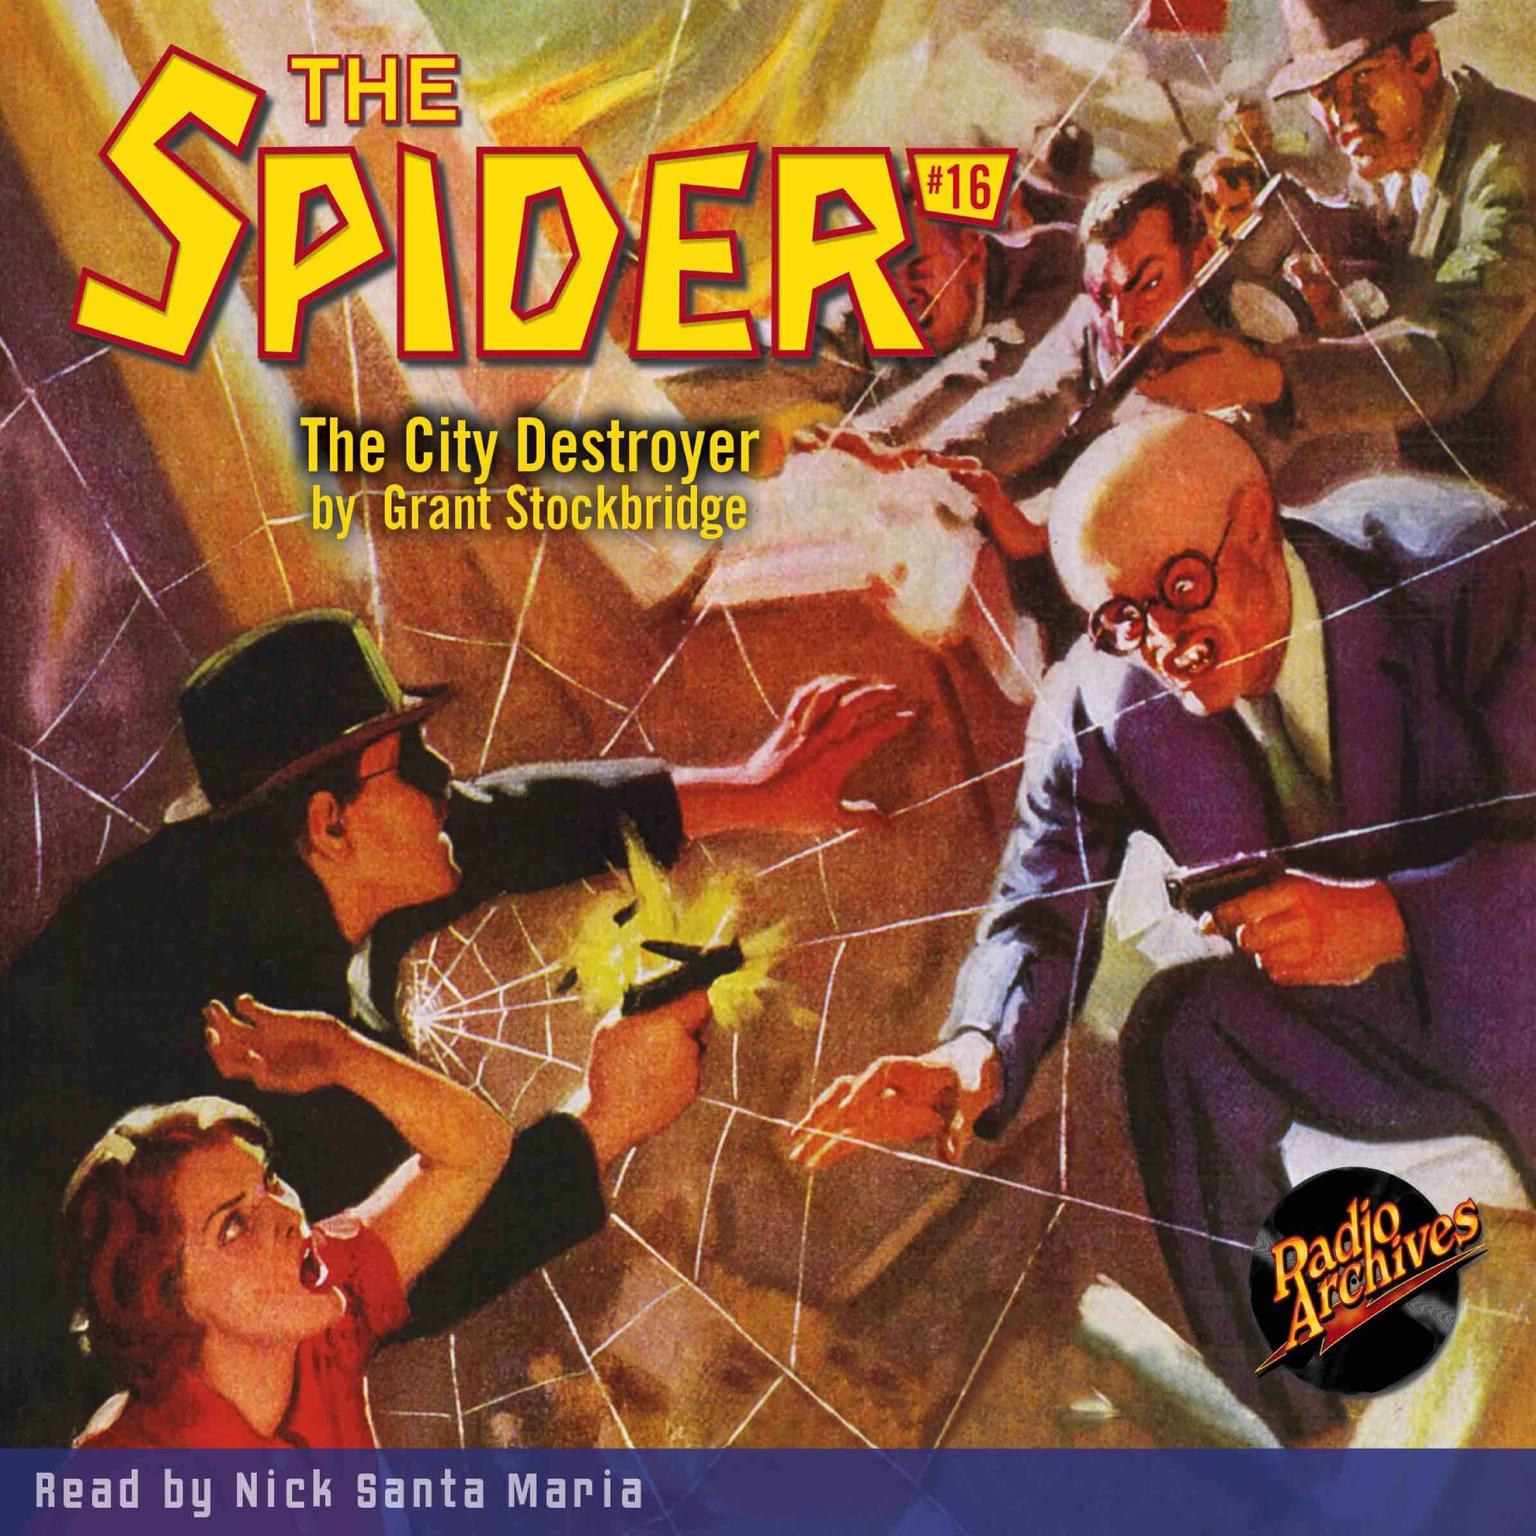 Spider #16, The: The City Destroyer Audiobook, by Grant Stockbridge